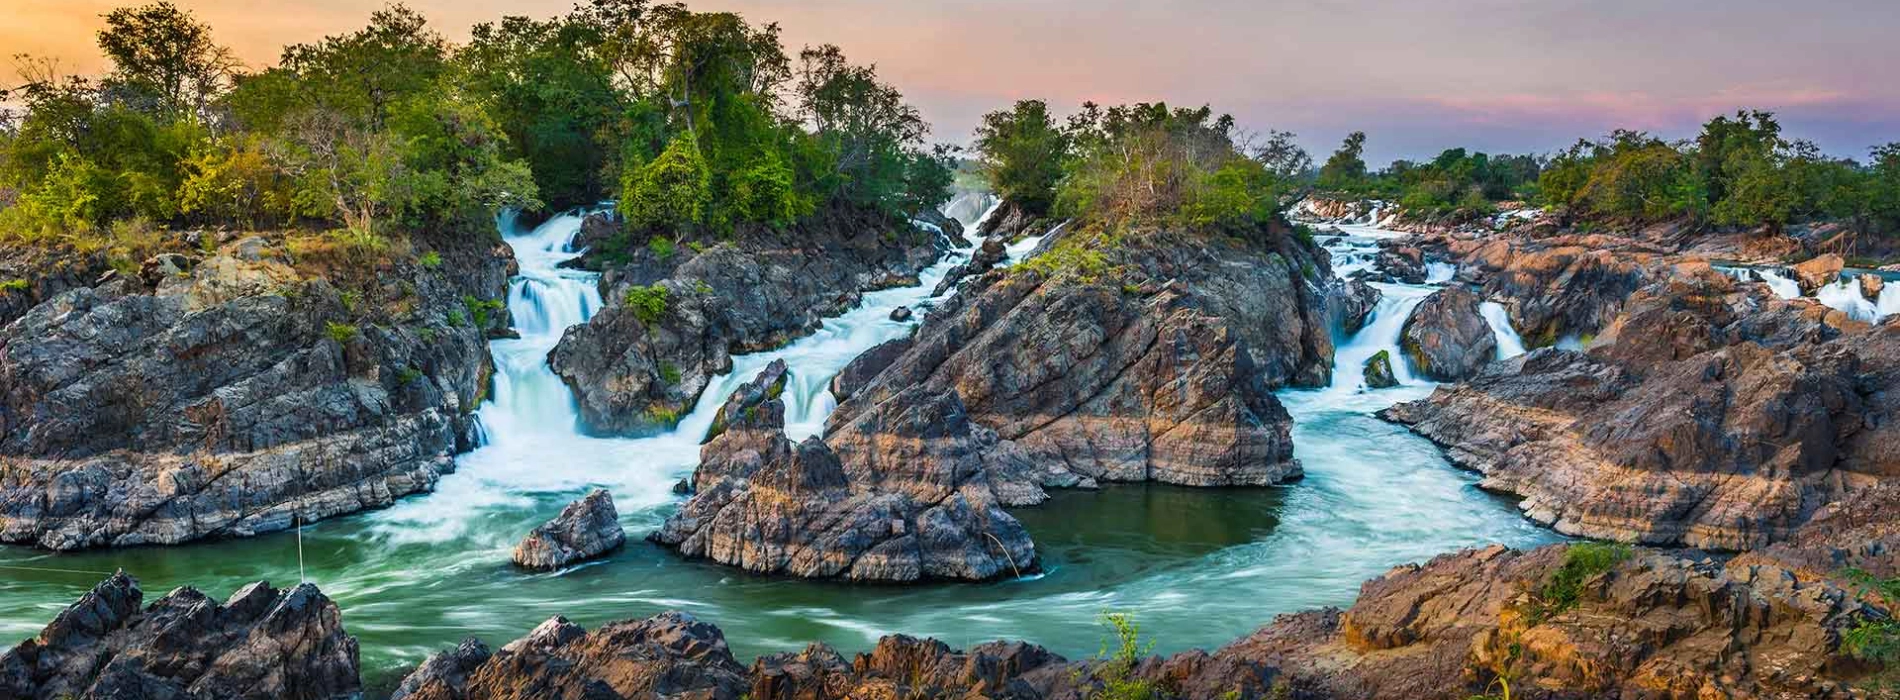 The best attractions for a 5-day tour in Southern Laos